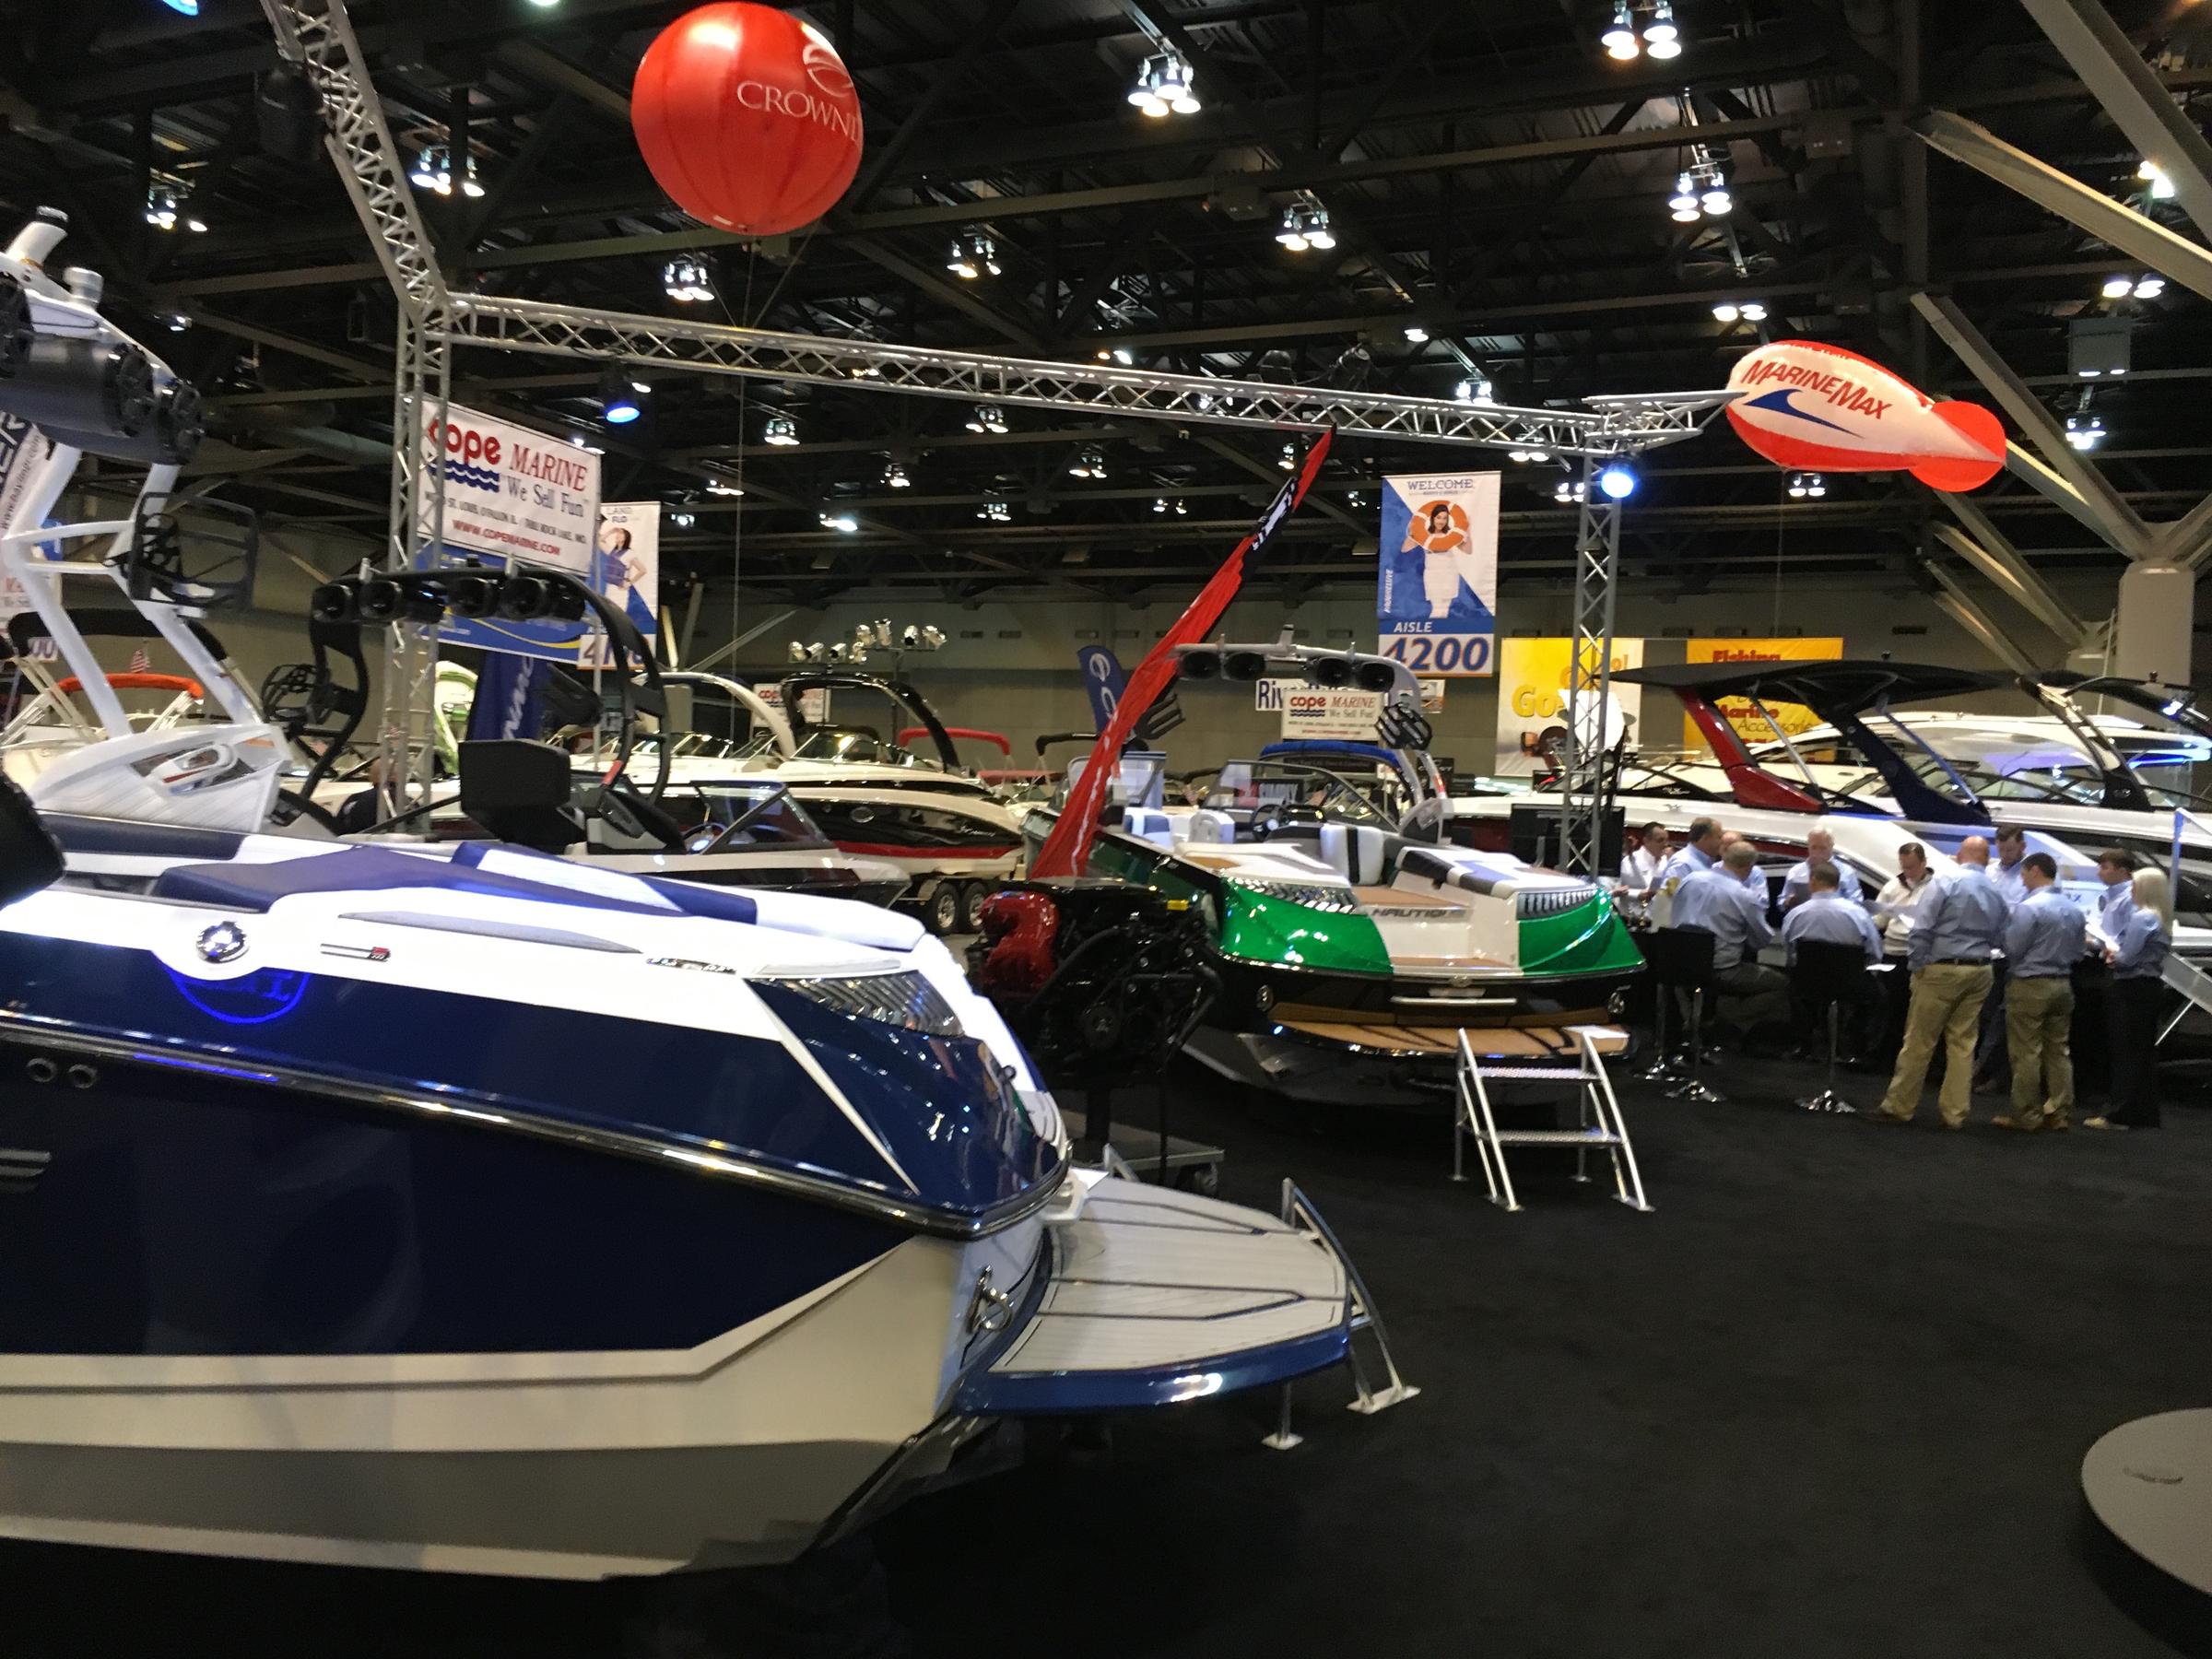 St. Louis Boat Show provides glimpse of life after the Rams St. Louis Public Radio